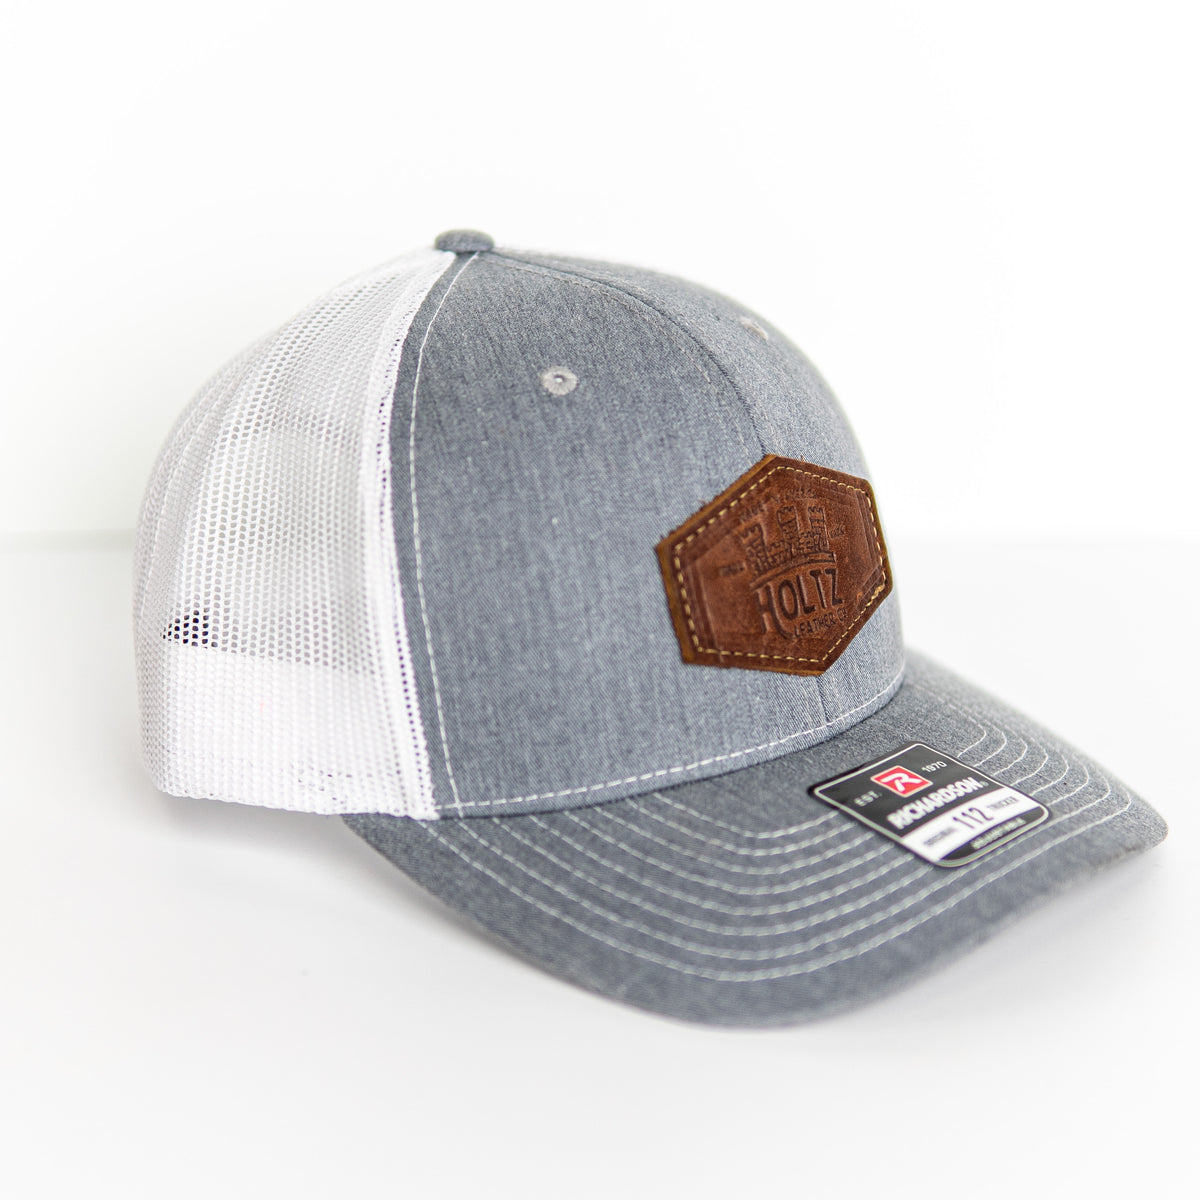 Custom Leather Patch Hat with Your Logo - Trucker Baseball Hats, Black/Whiteat Holtz Leather